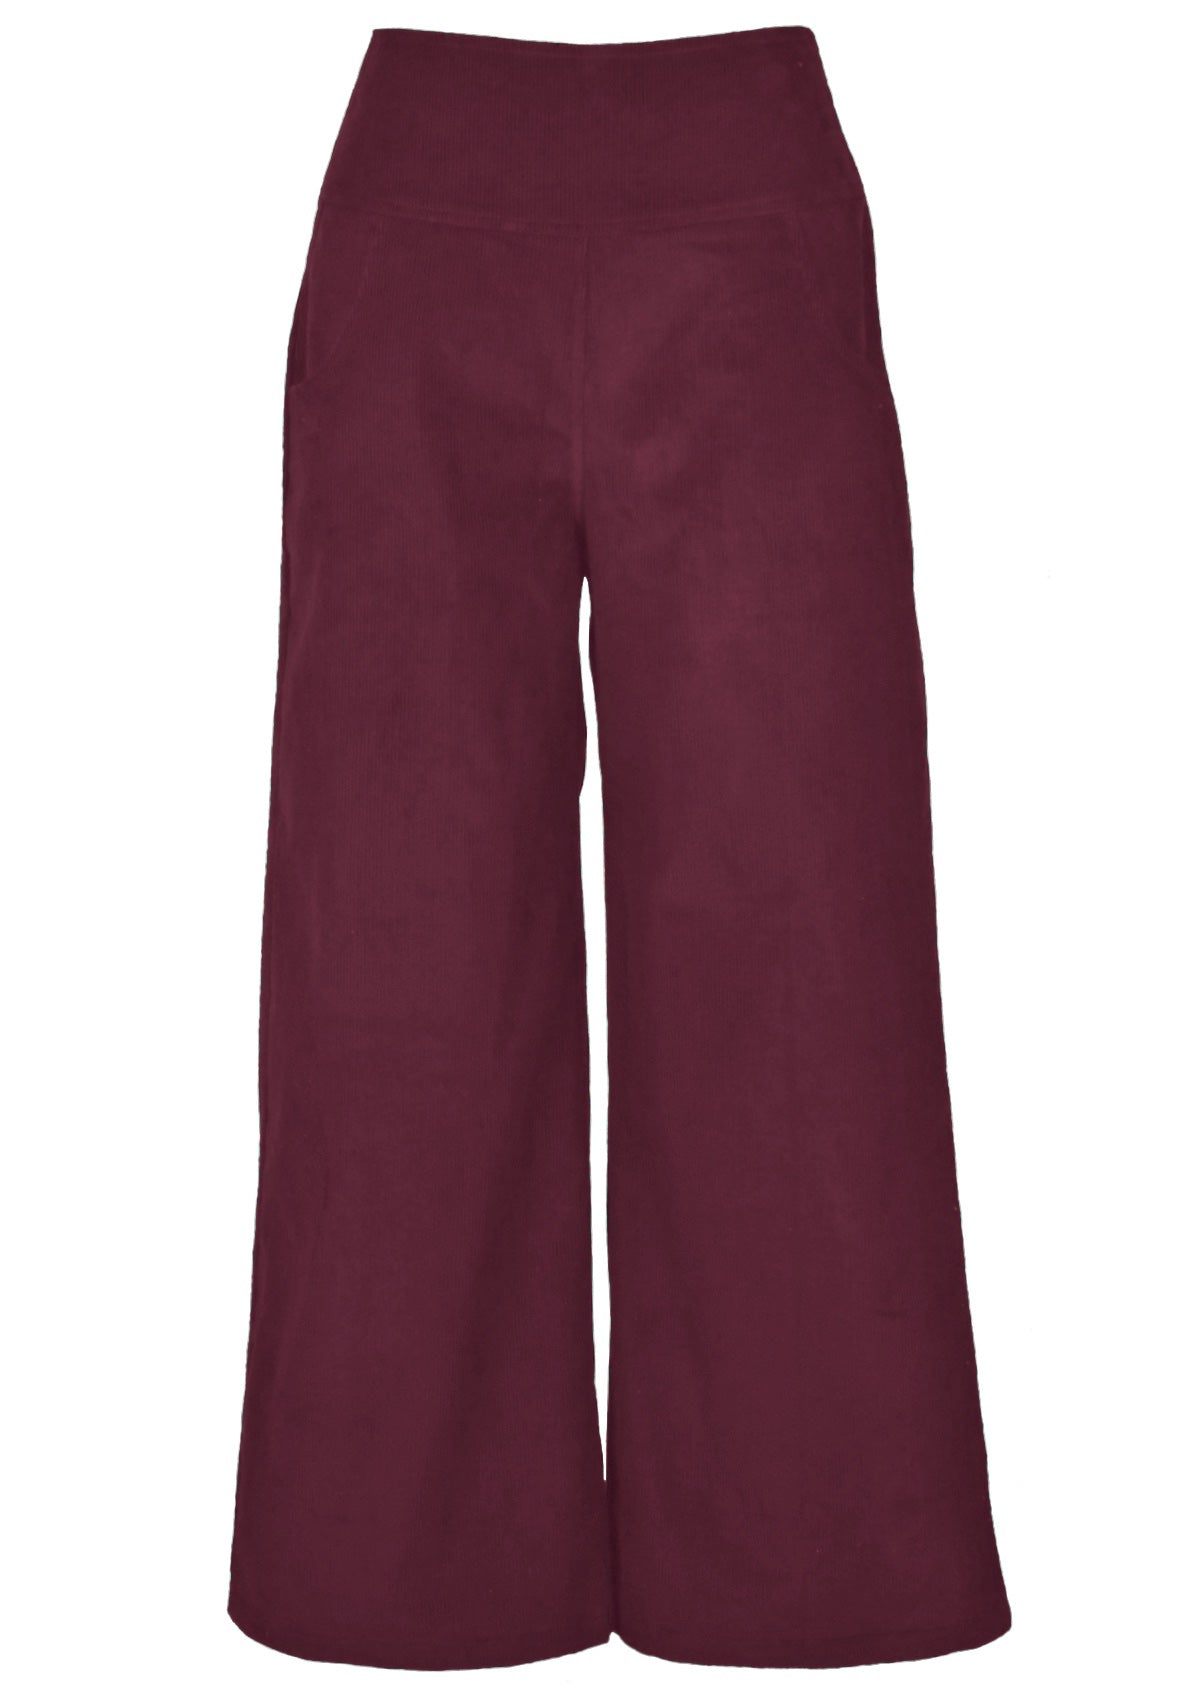 Deep red coloured 100% cotton corduroy pants with wide legs. 